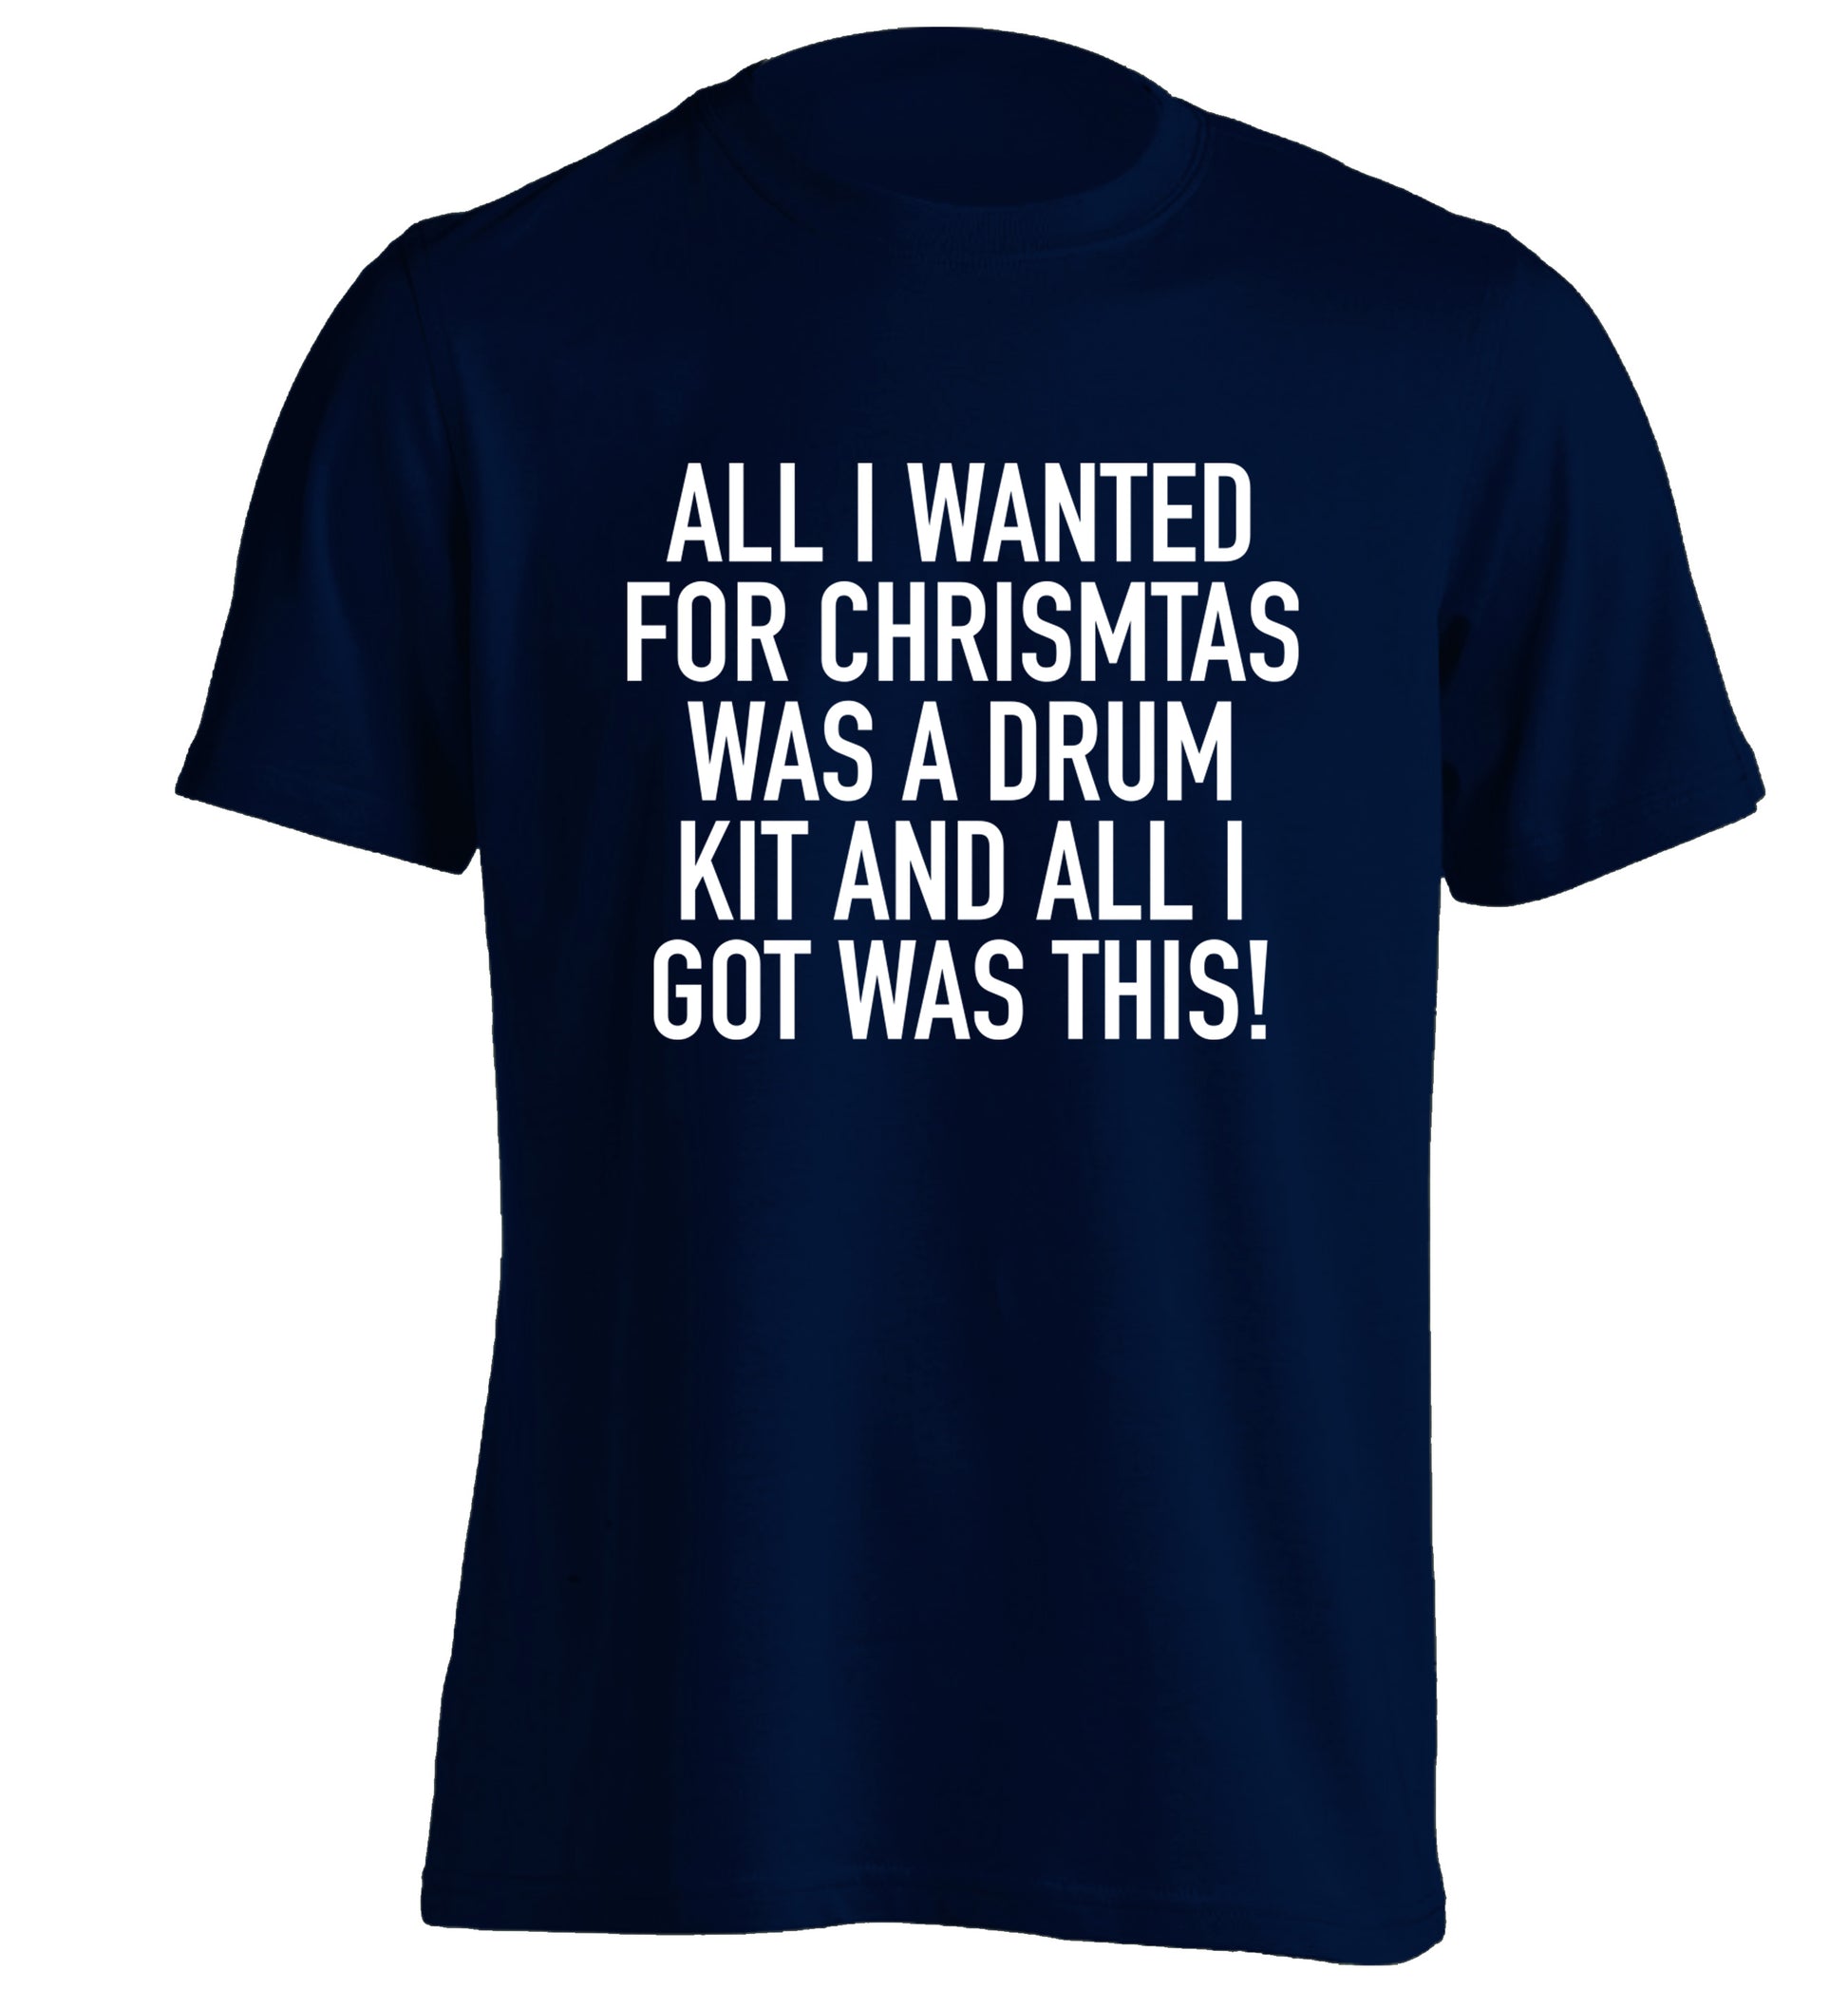 All I wanted for Christmas was a drum kit and all I got was this! adults unisex navy Tshirt 2XL